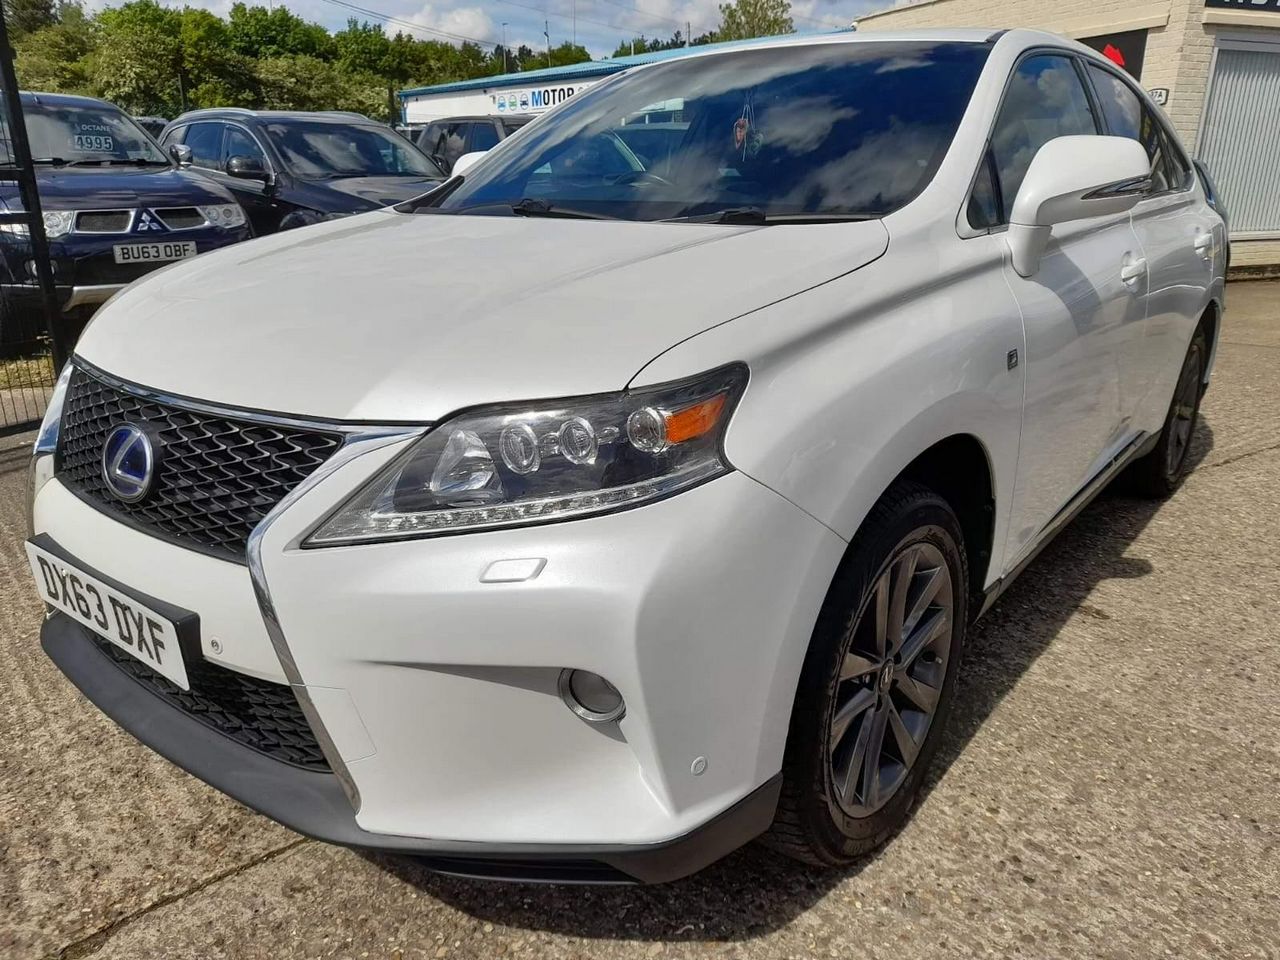 2013 Lexus RX 3.5 450h V6 F Sport SUV 5dr Petrol Hybrid CVT 4WD Euro 5 (s/s) (299 ps) - Picture 5 of 53